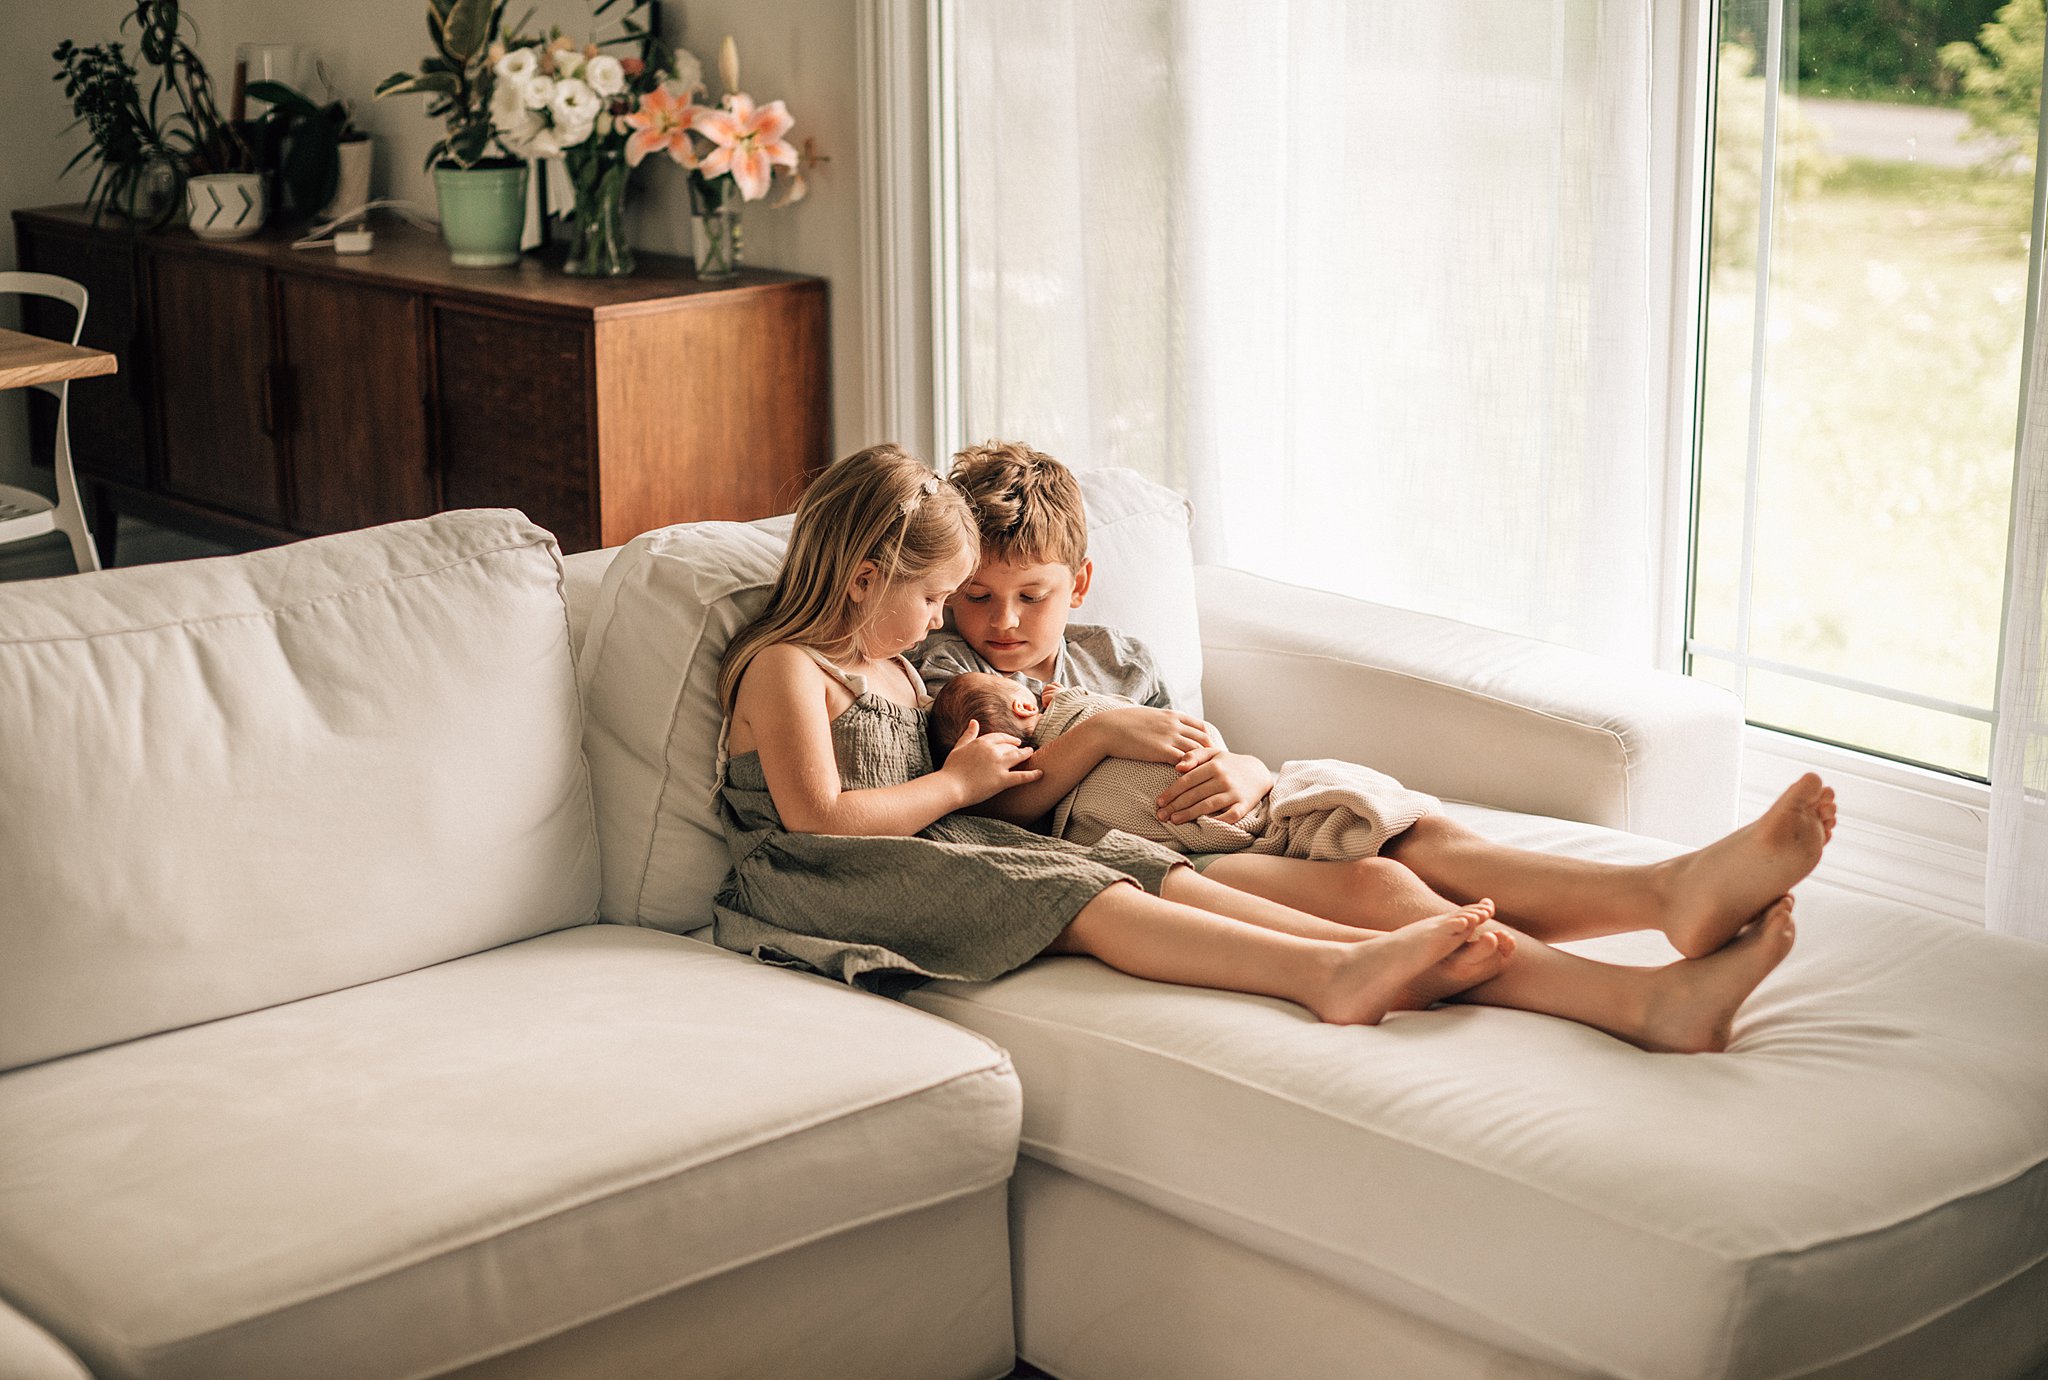 A brother and sister sit on a couch together while holding and cuddling their newborn sibling